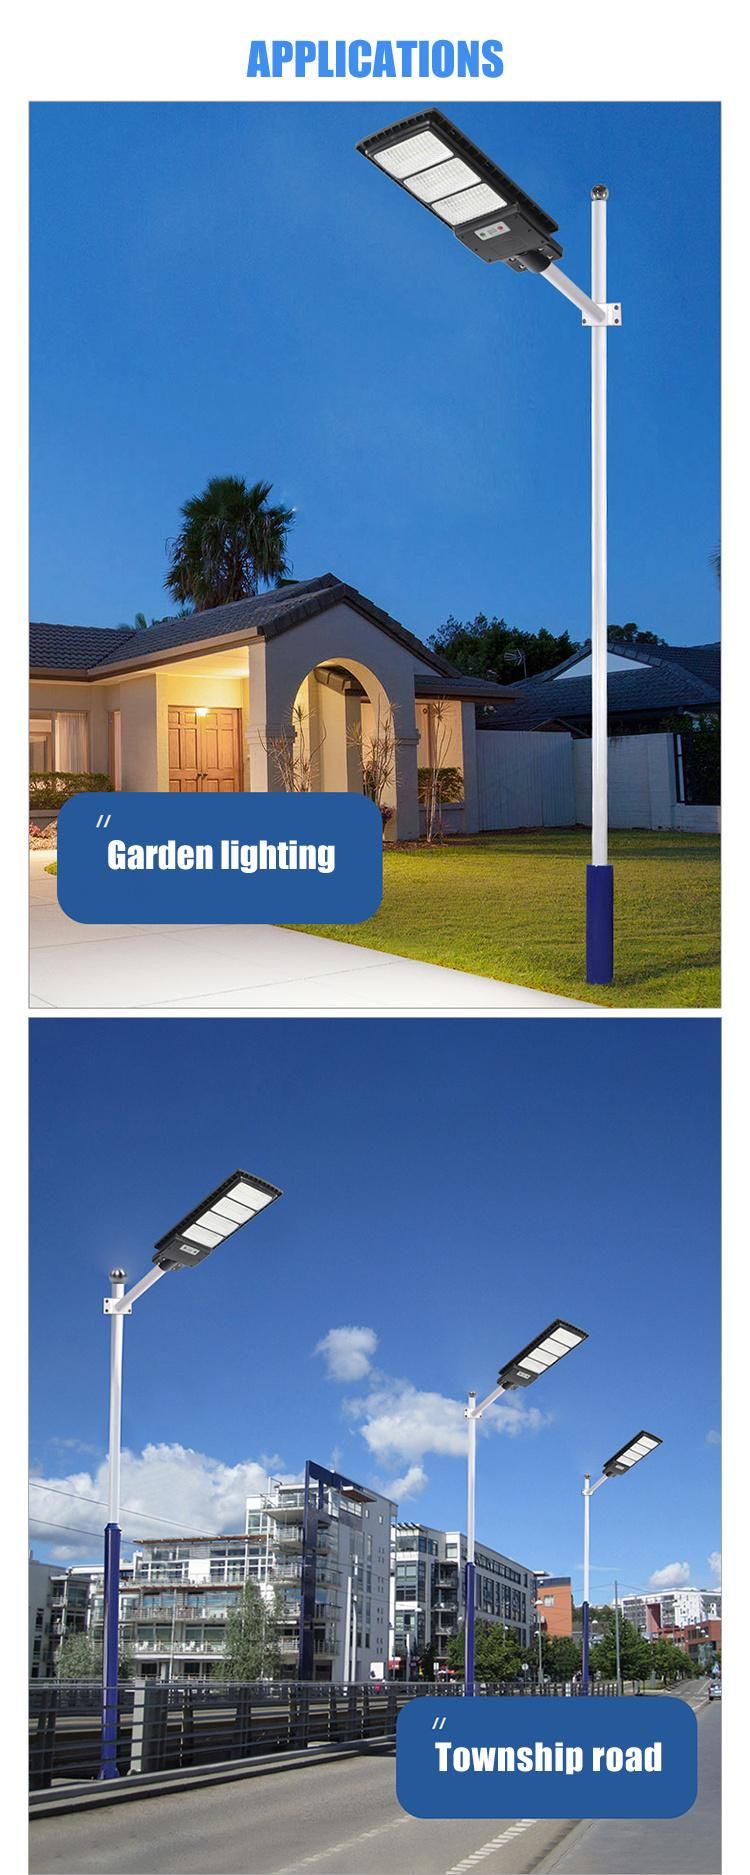 Road Lamp Integrated Outdoor All in One Solar Street Light